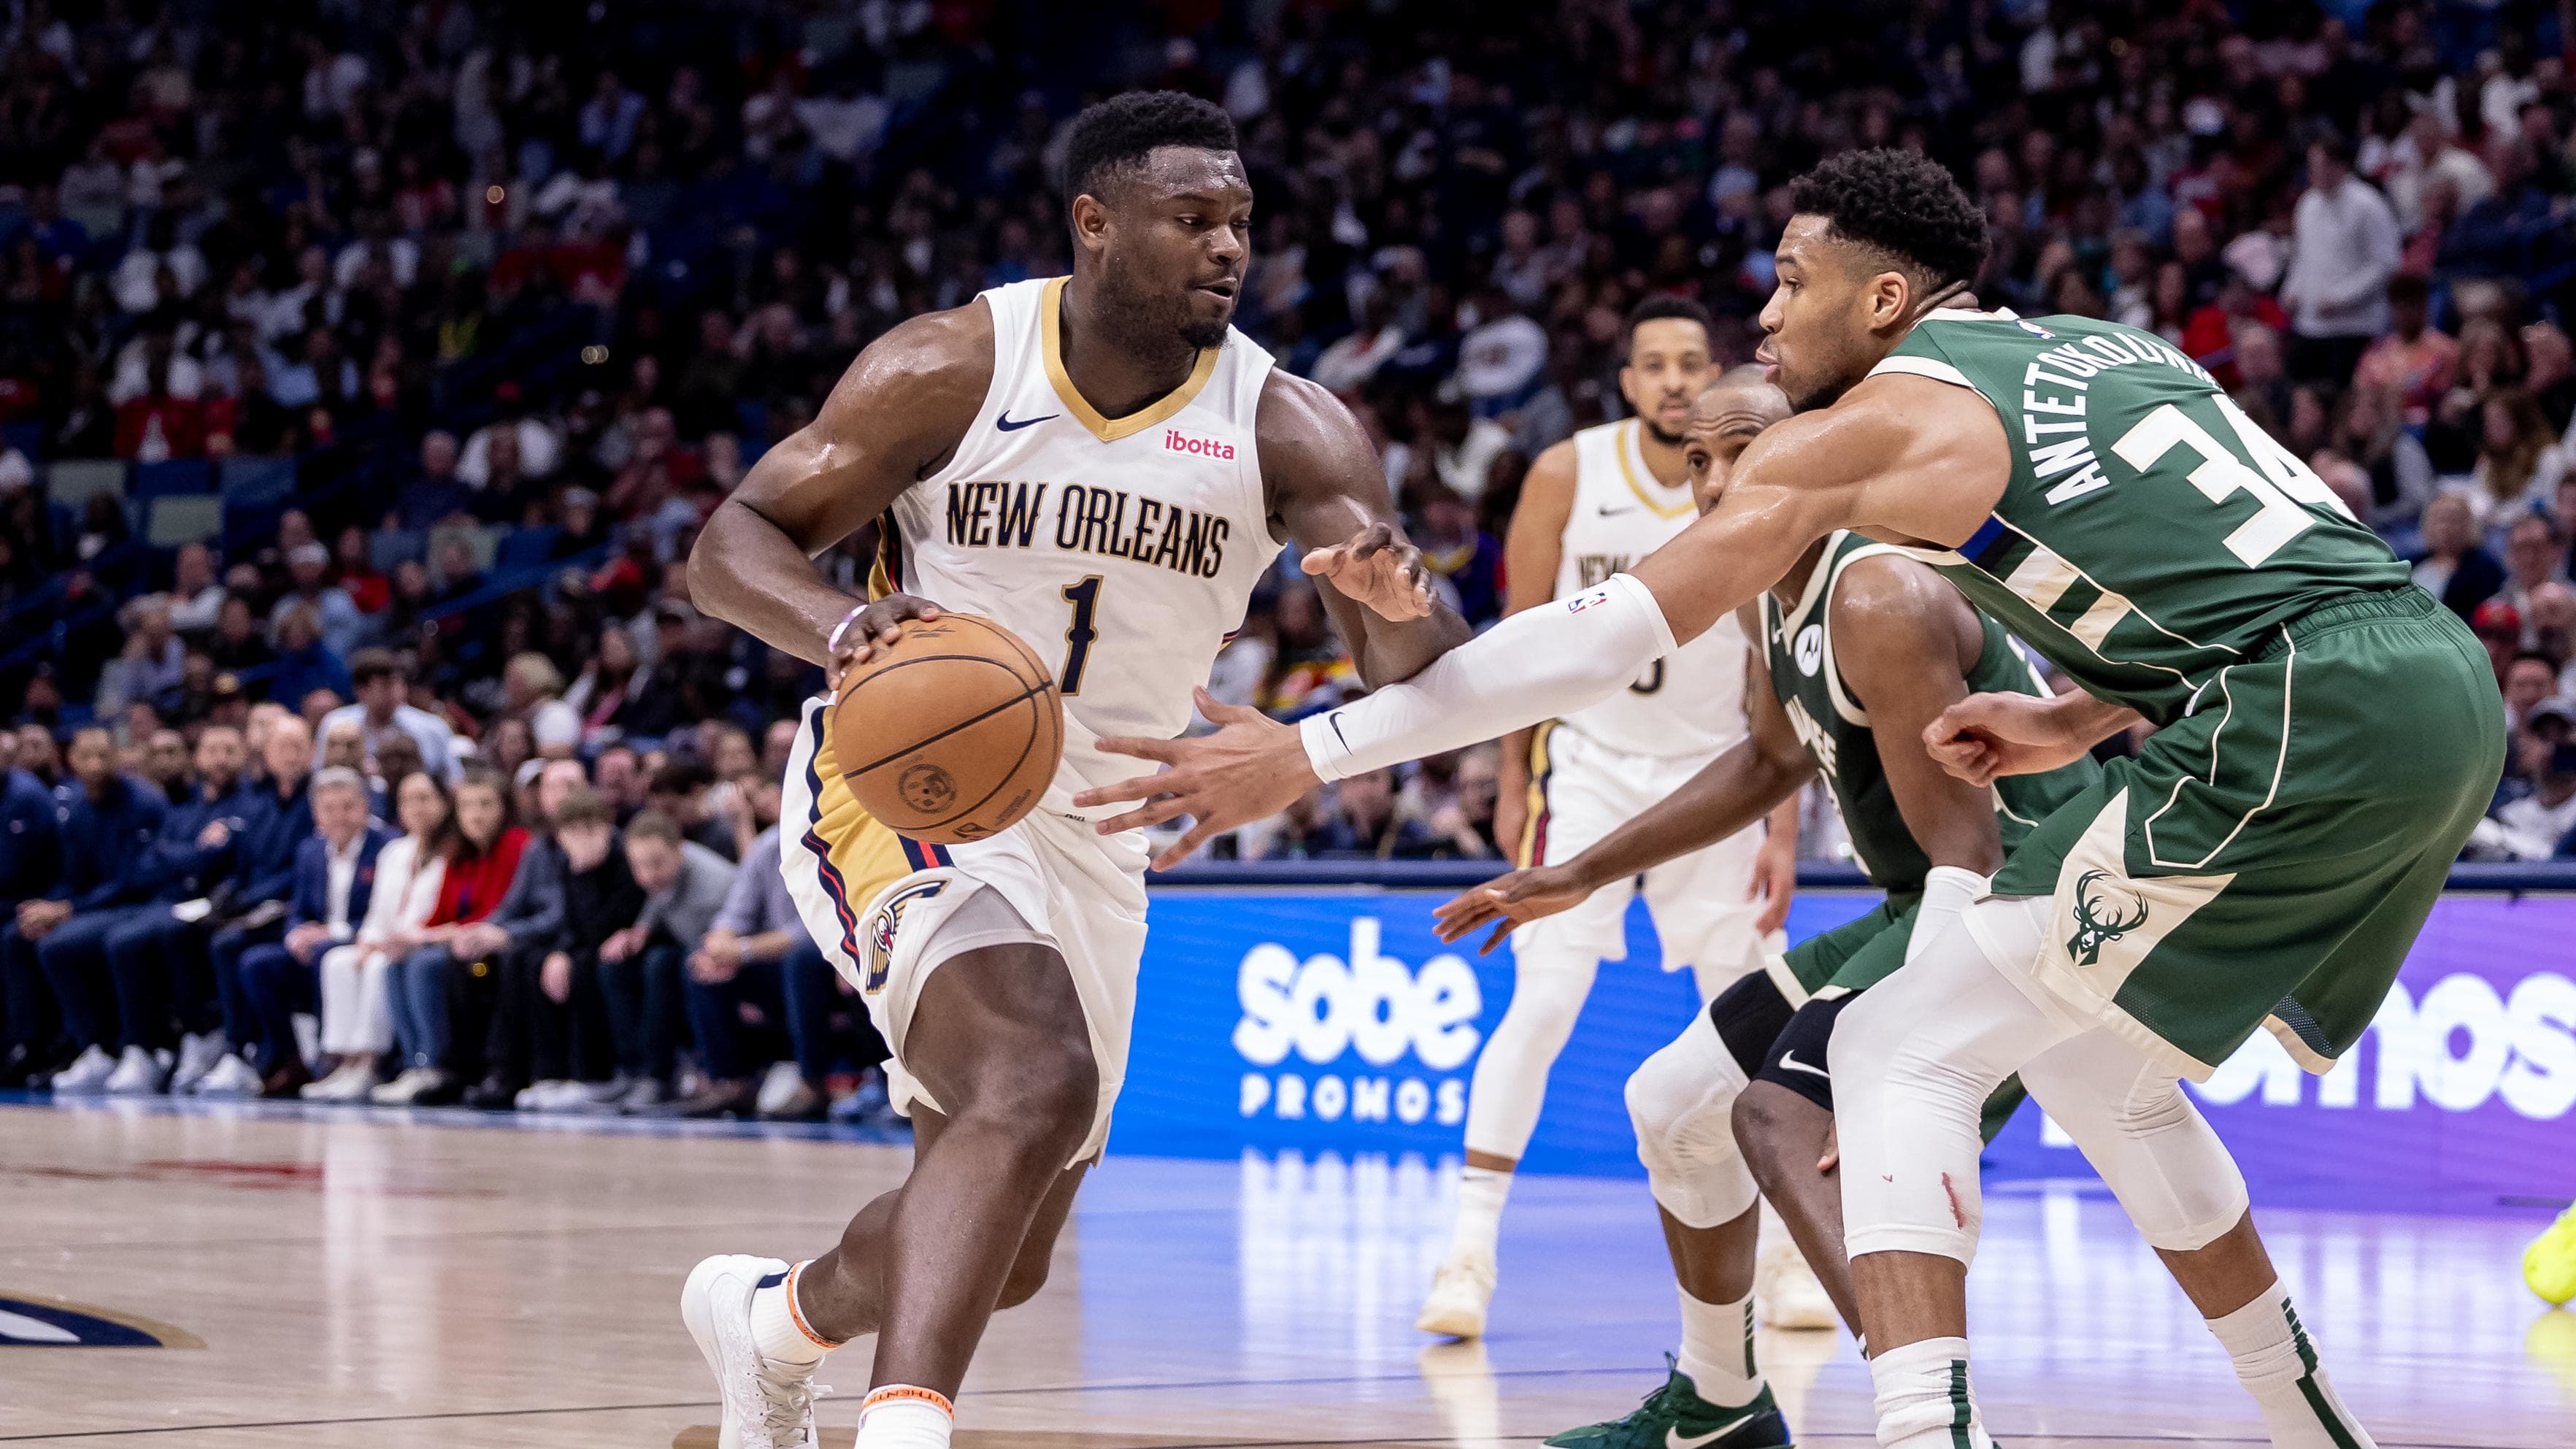 Zion's Big Fourth Quarter Lifts Pelicans Over Giannis, Bucks